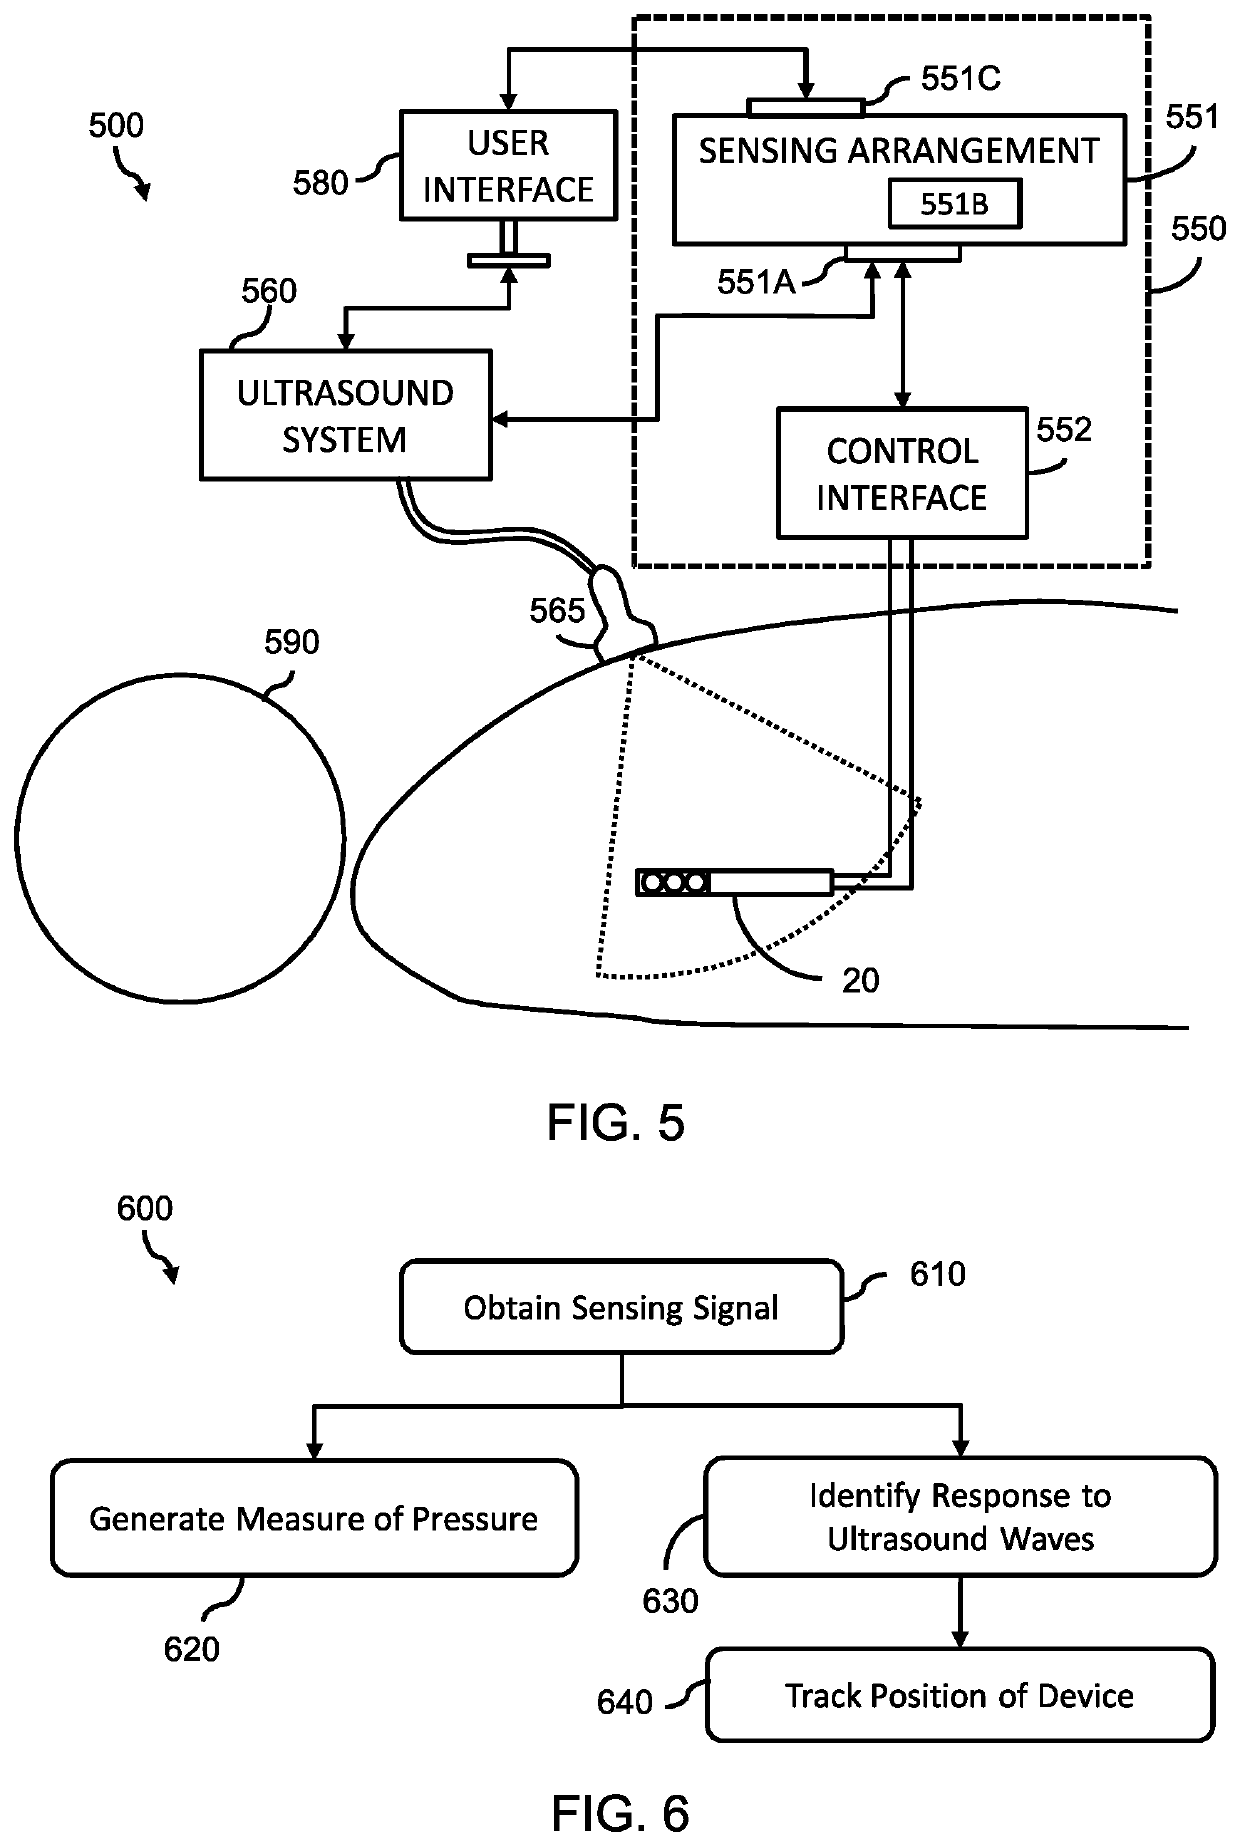 Tracking an interventional device during an ultrasound imaging procedure